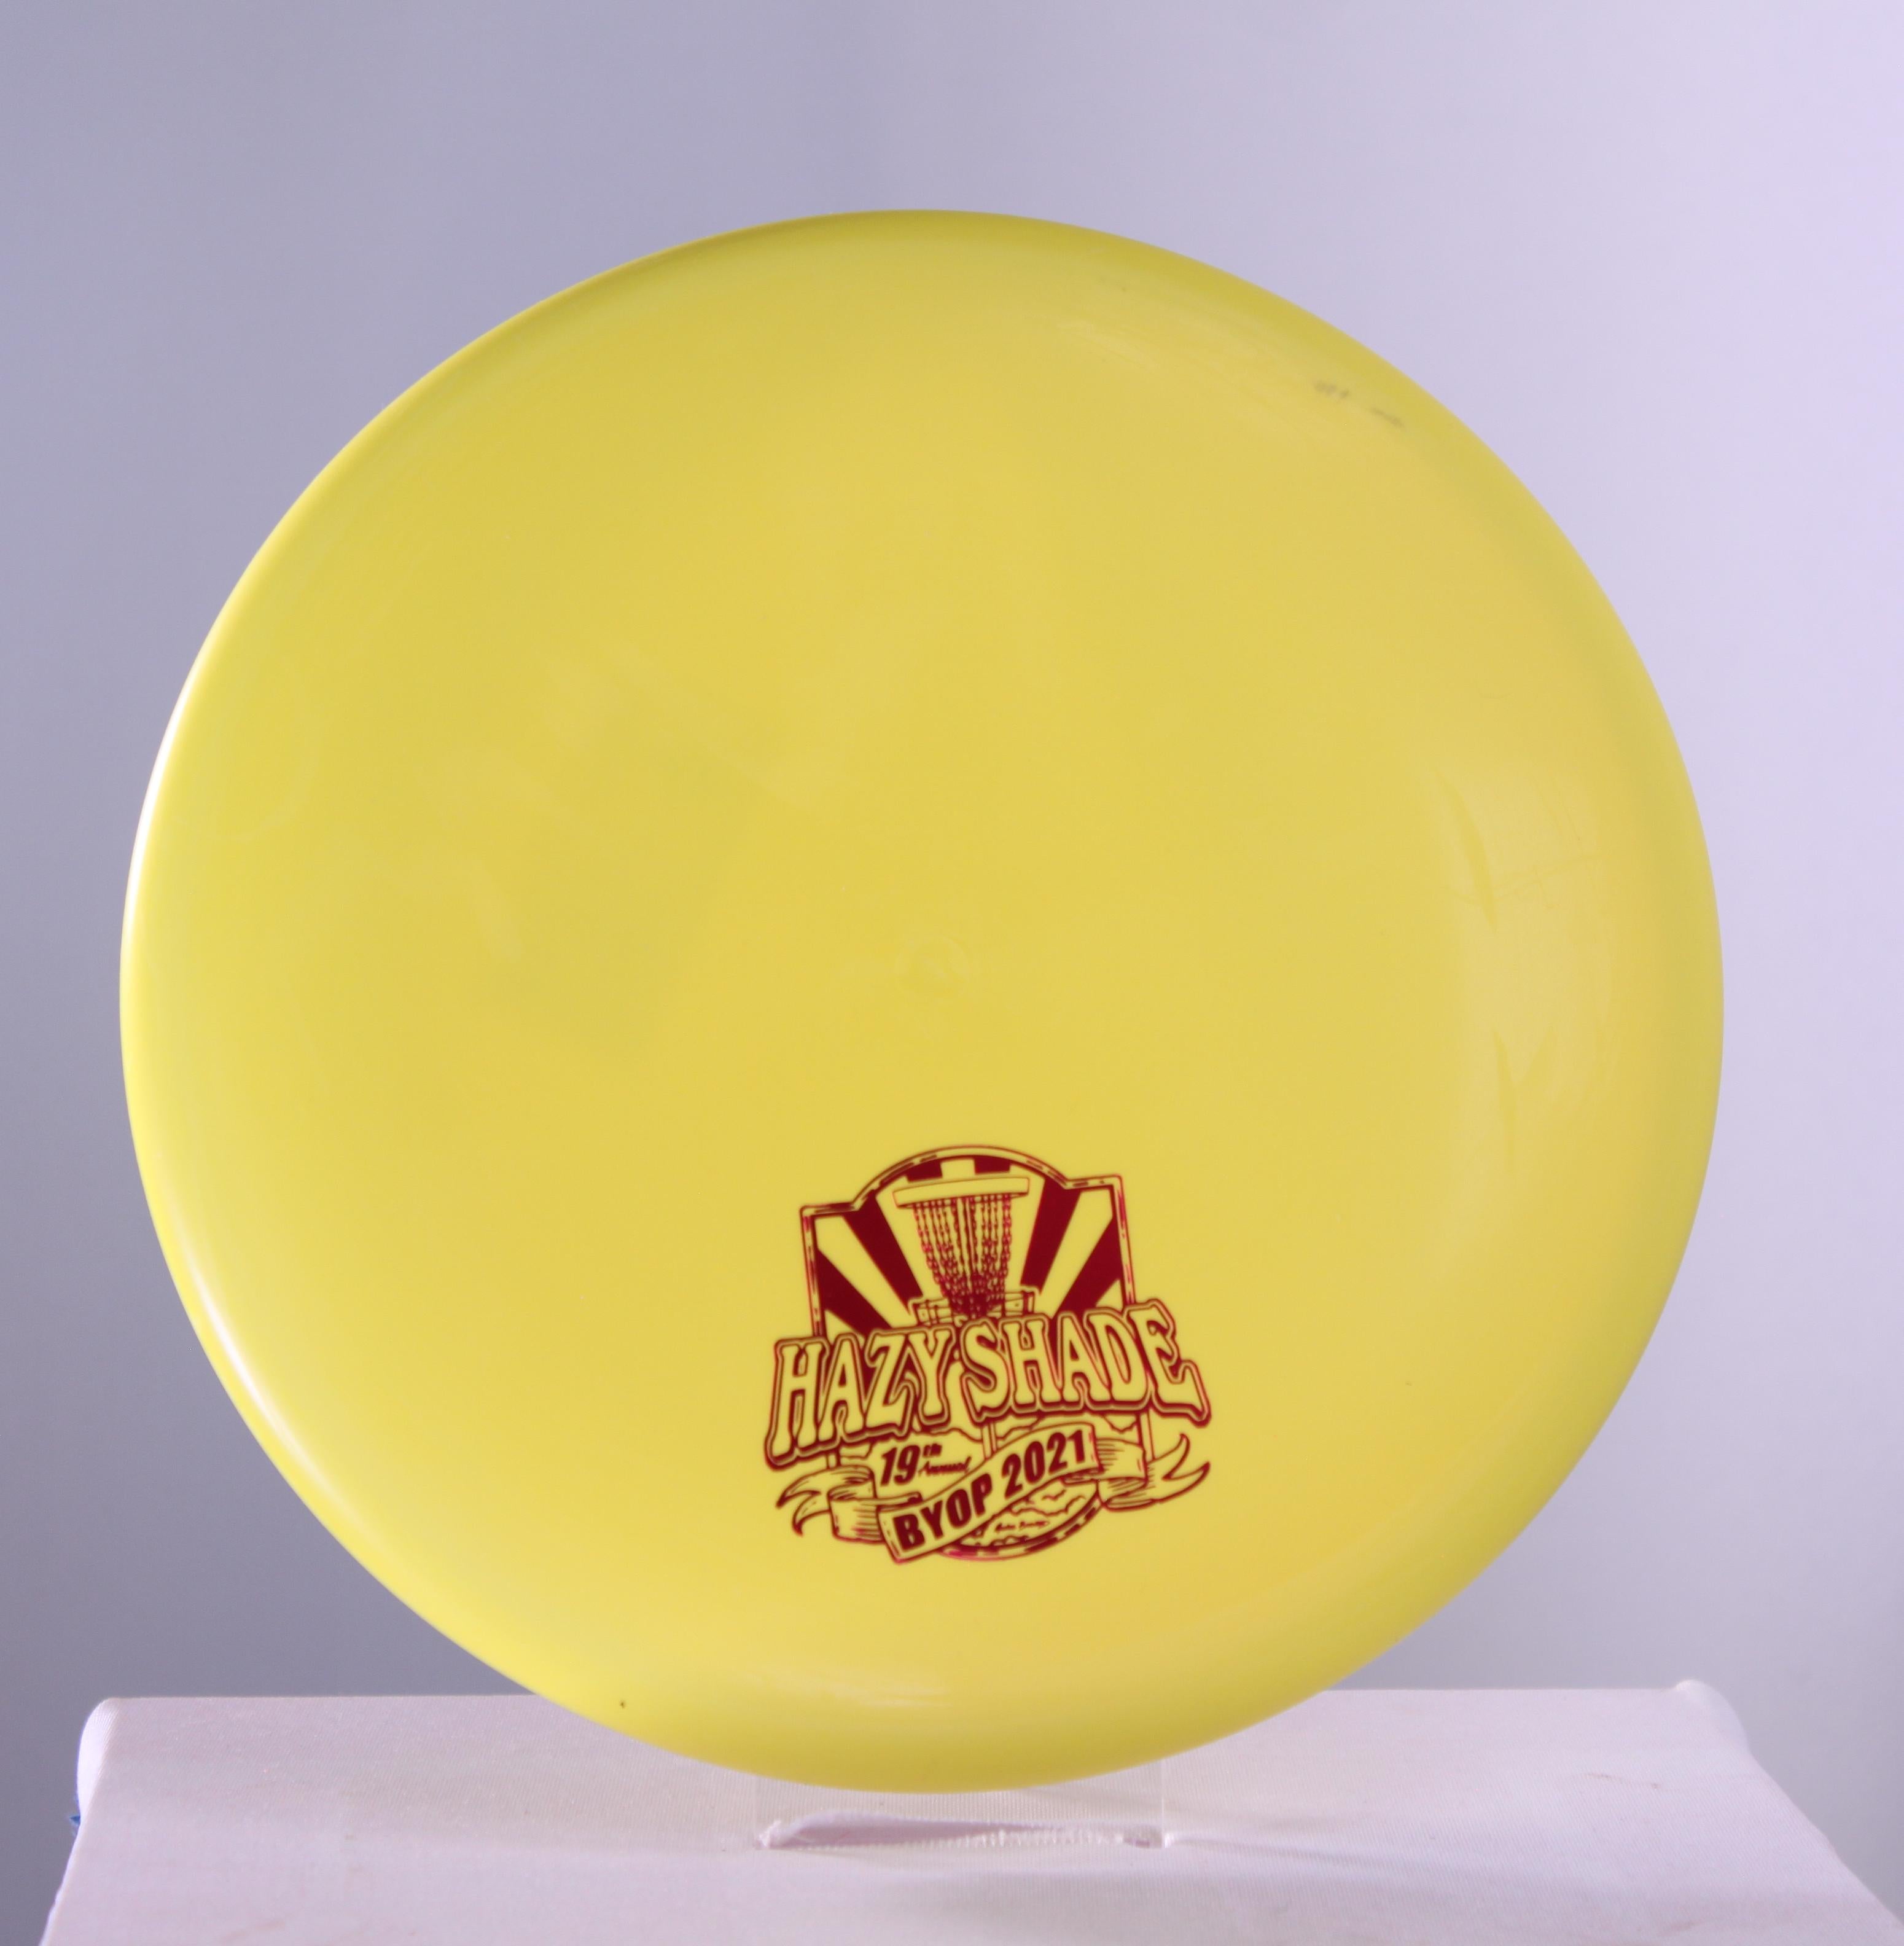 19th Annual BYOP Doubles Banana Scented Prime Warden